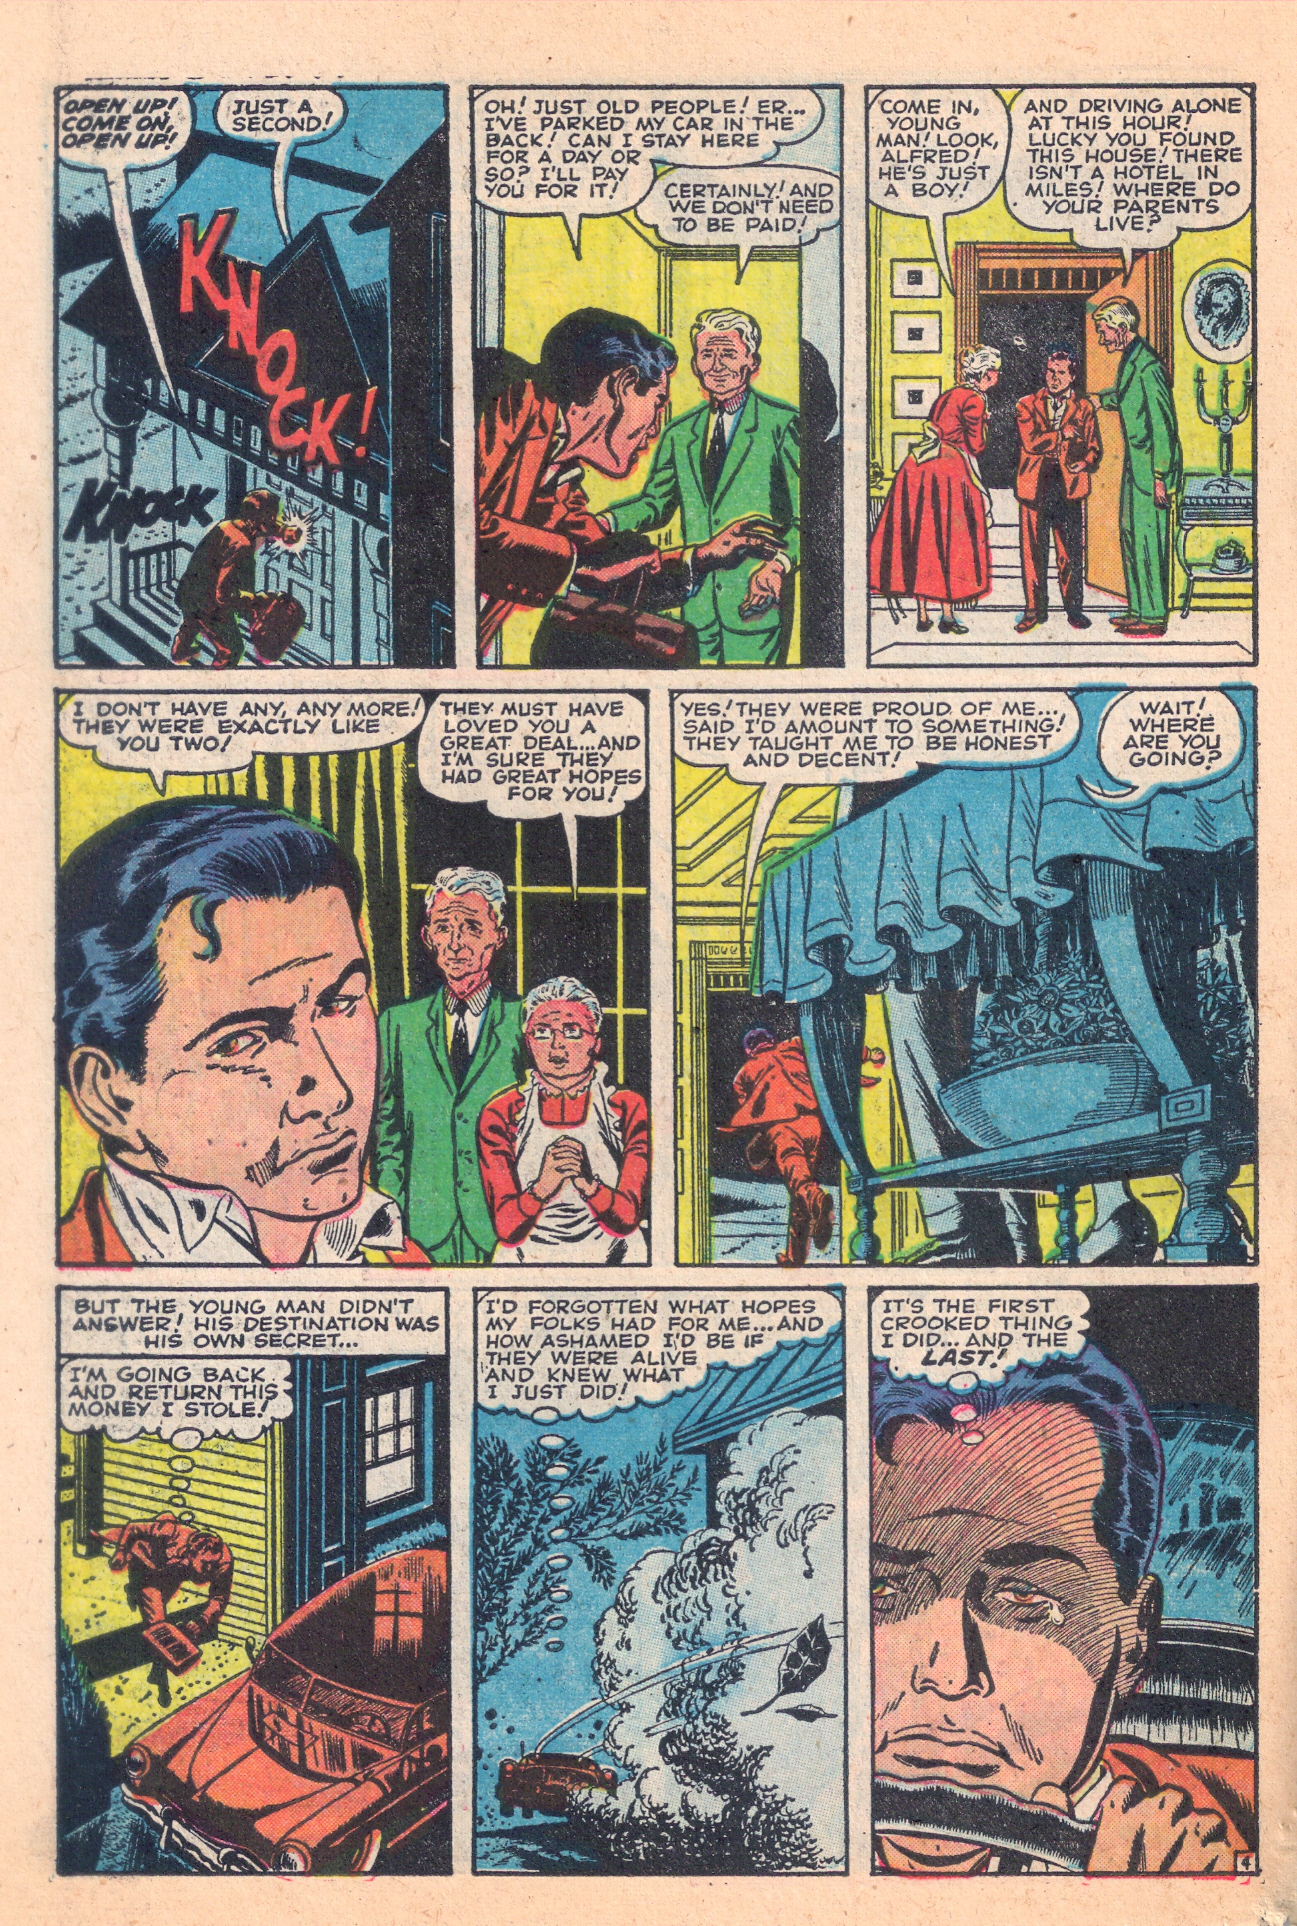 Marvel Tales (1949) 134 Page 5